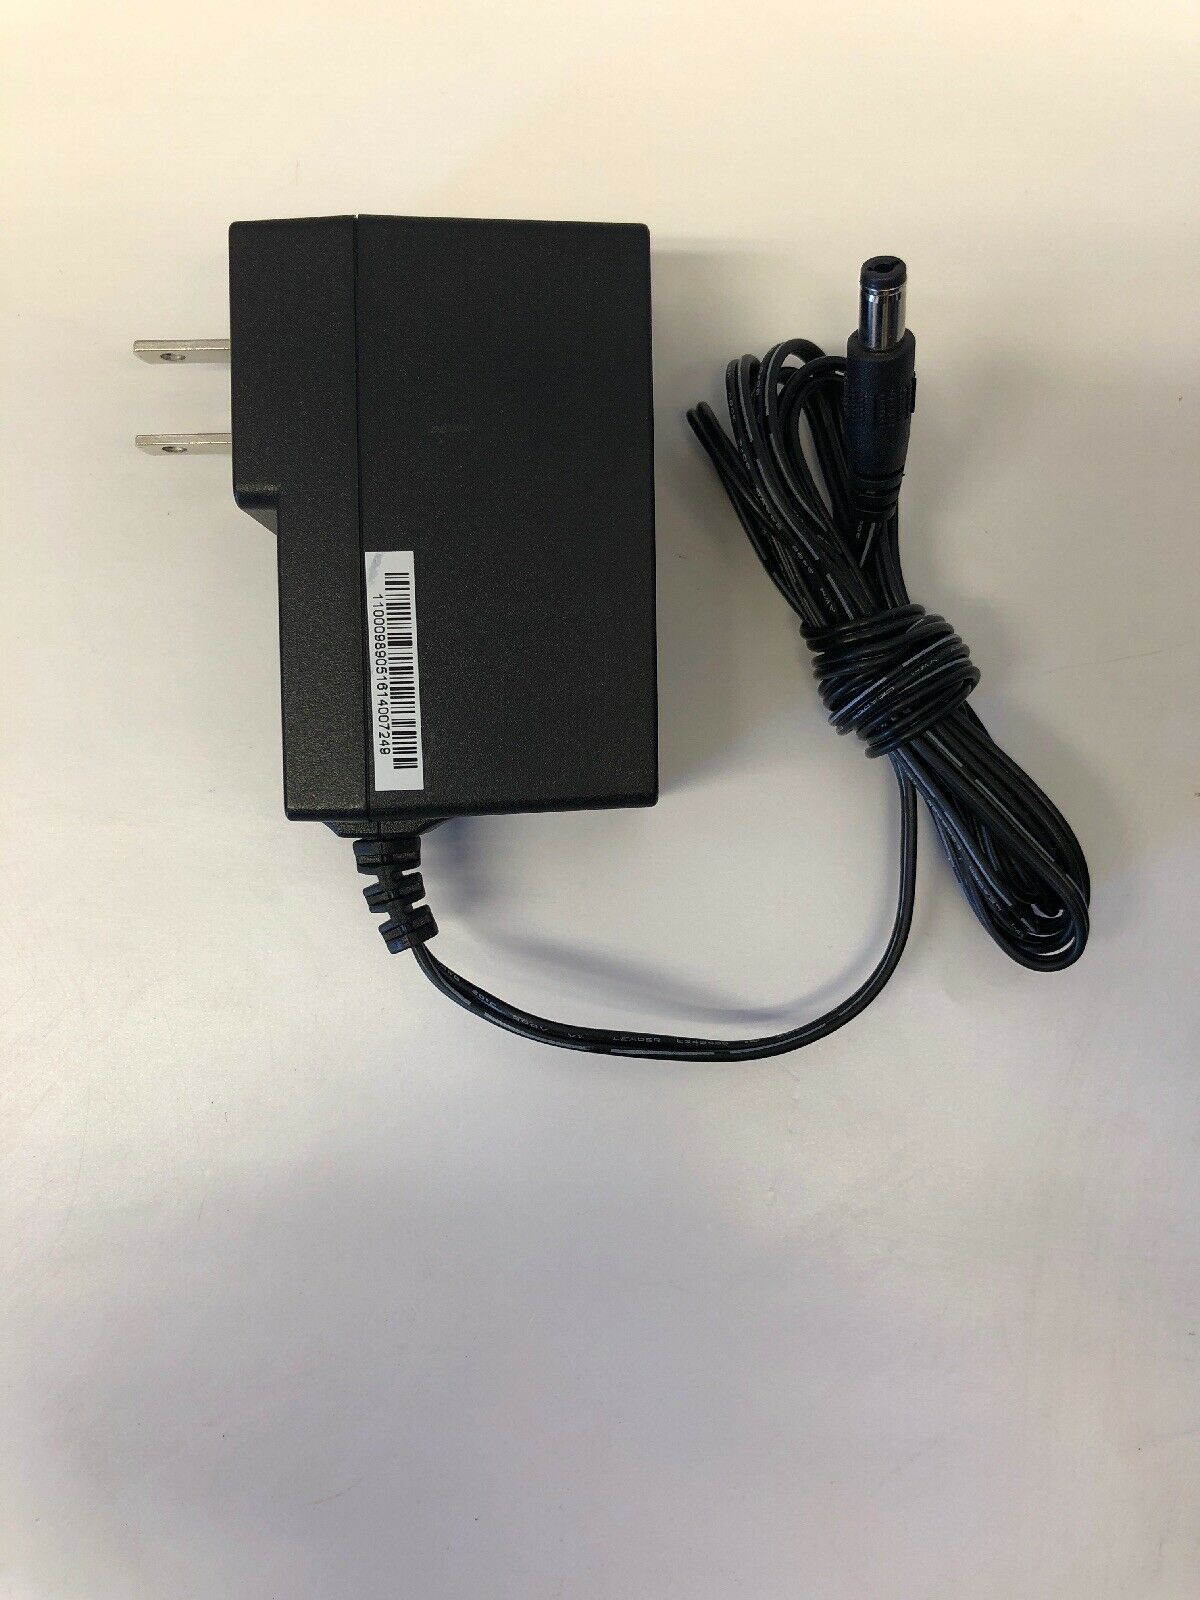 AC Adapter Charger For Sun Joe Mj401C-Xr 28V 5 Ah SunJoe Lawn Mower Power Supply Specifications: Type: AC to DC Standar